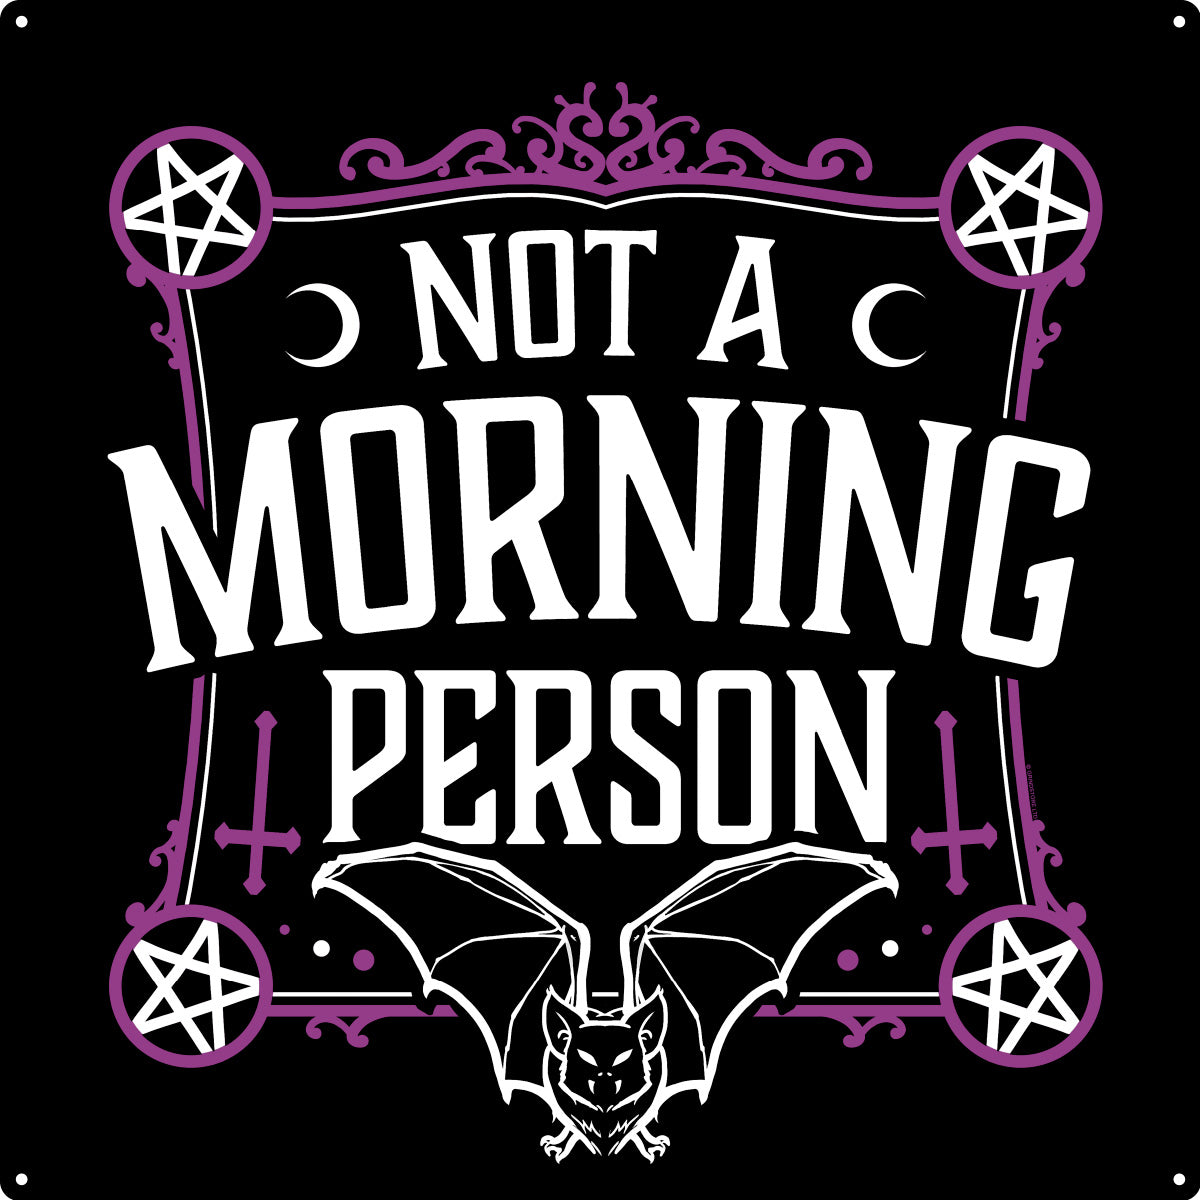 Not A Morning Person Square Tin Sign